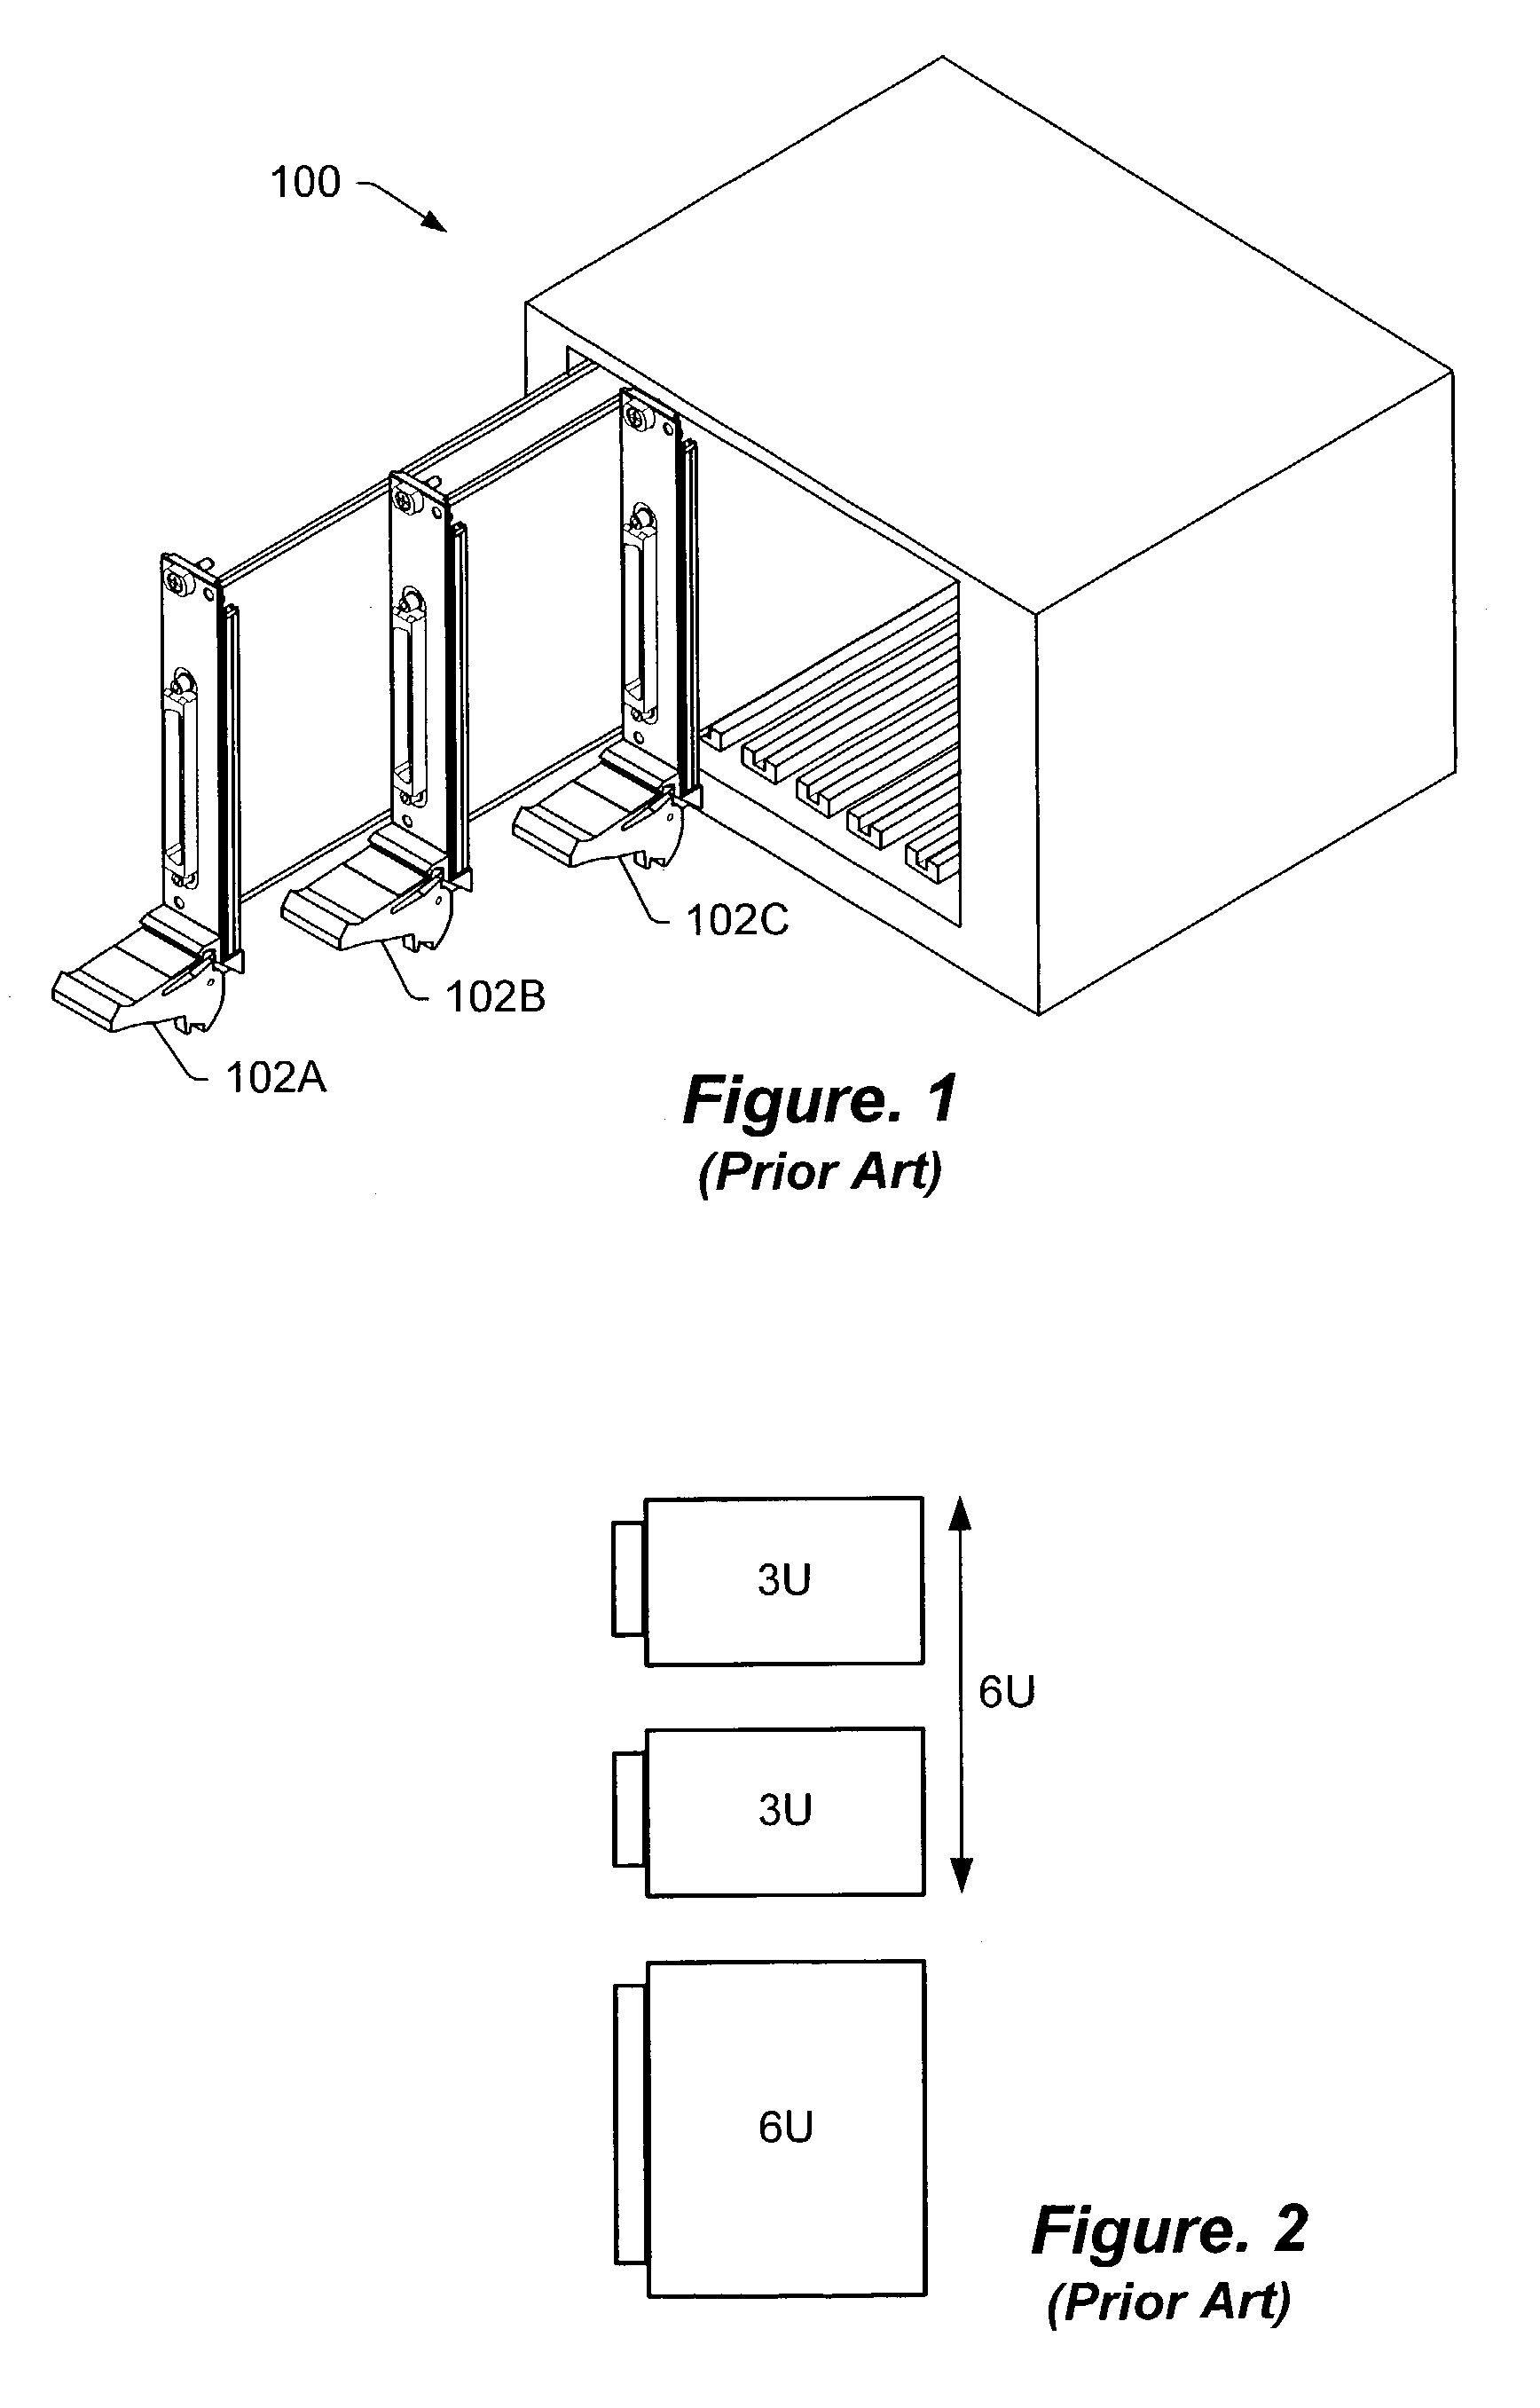 PXI chassis with backwards compatibility for existing PXI devices